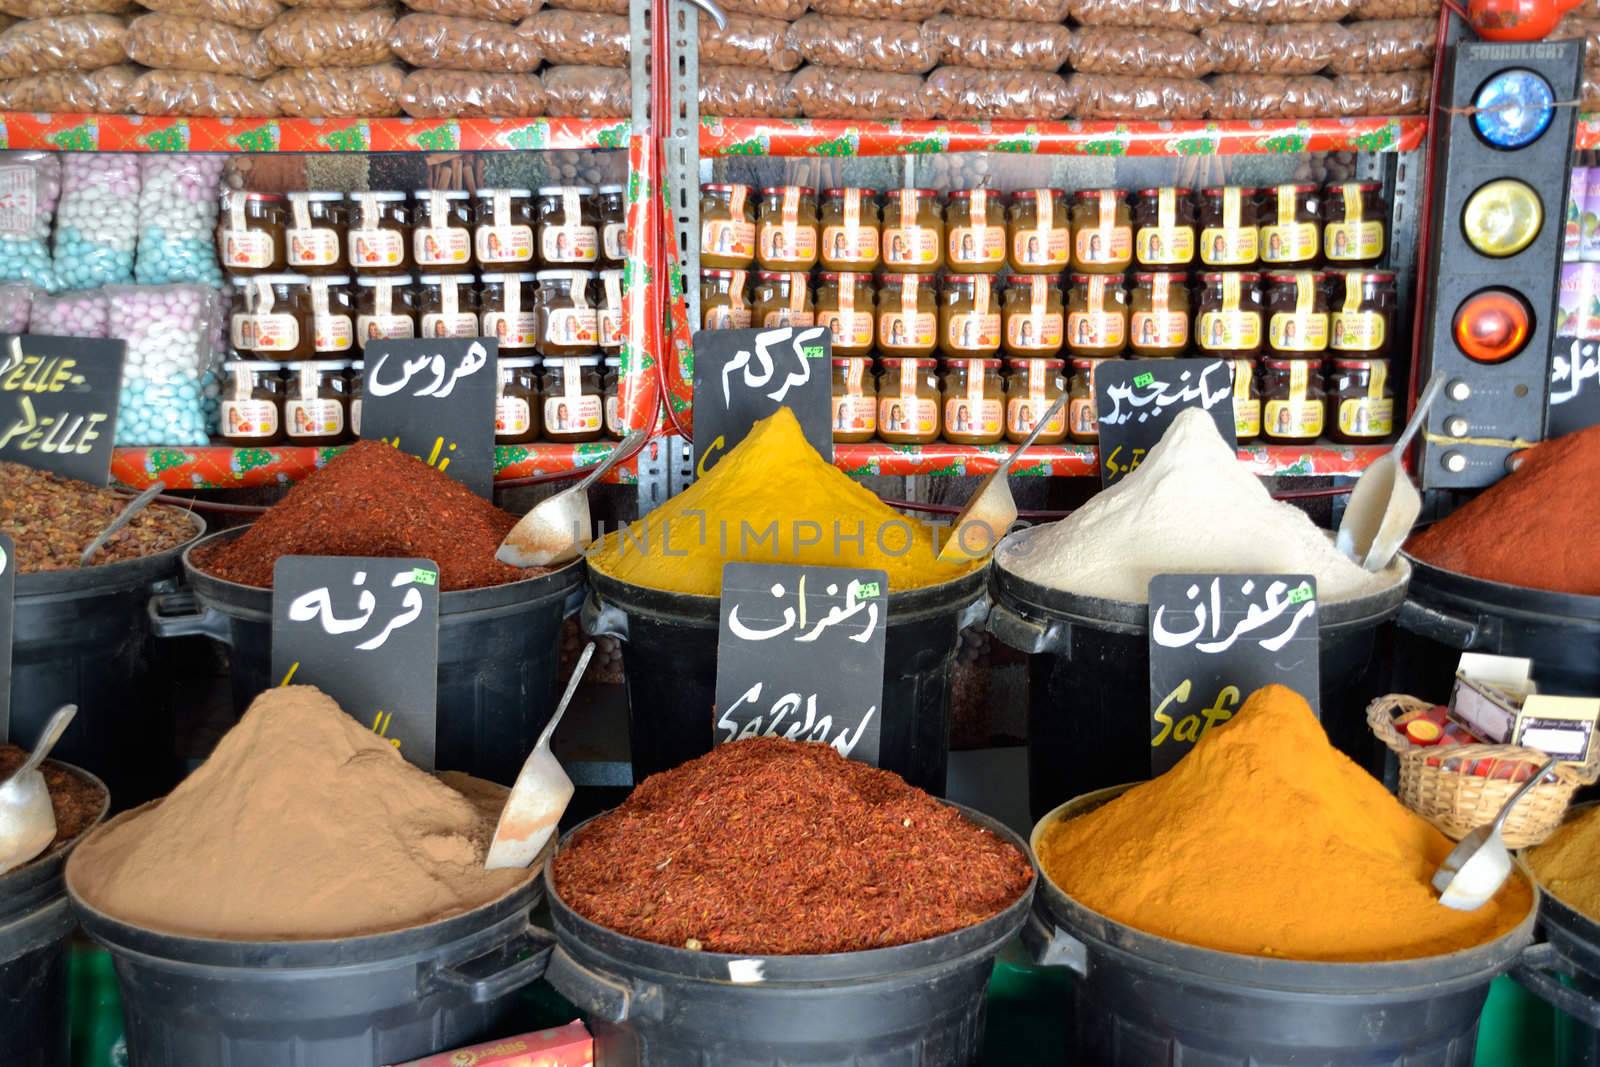 Spices by fahrner